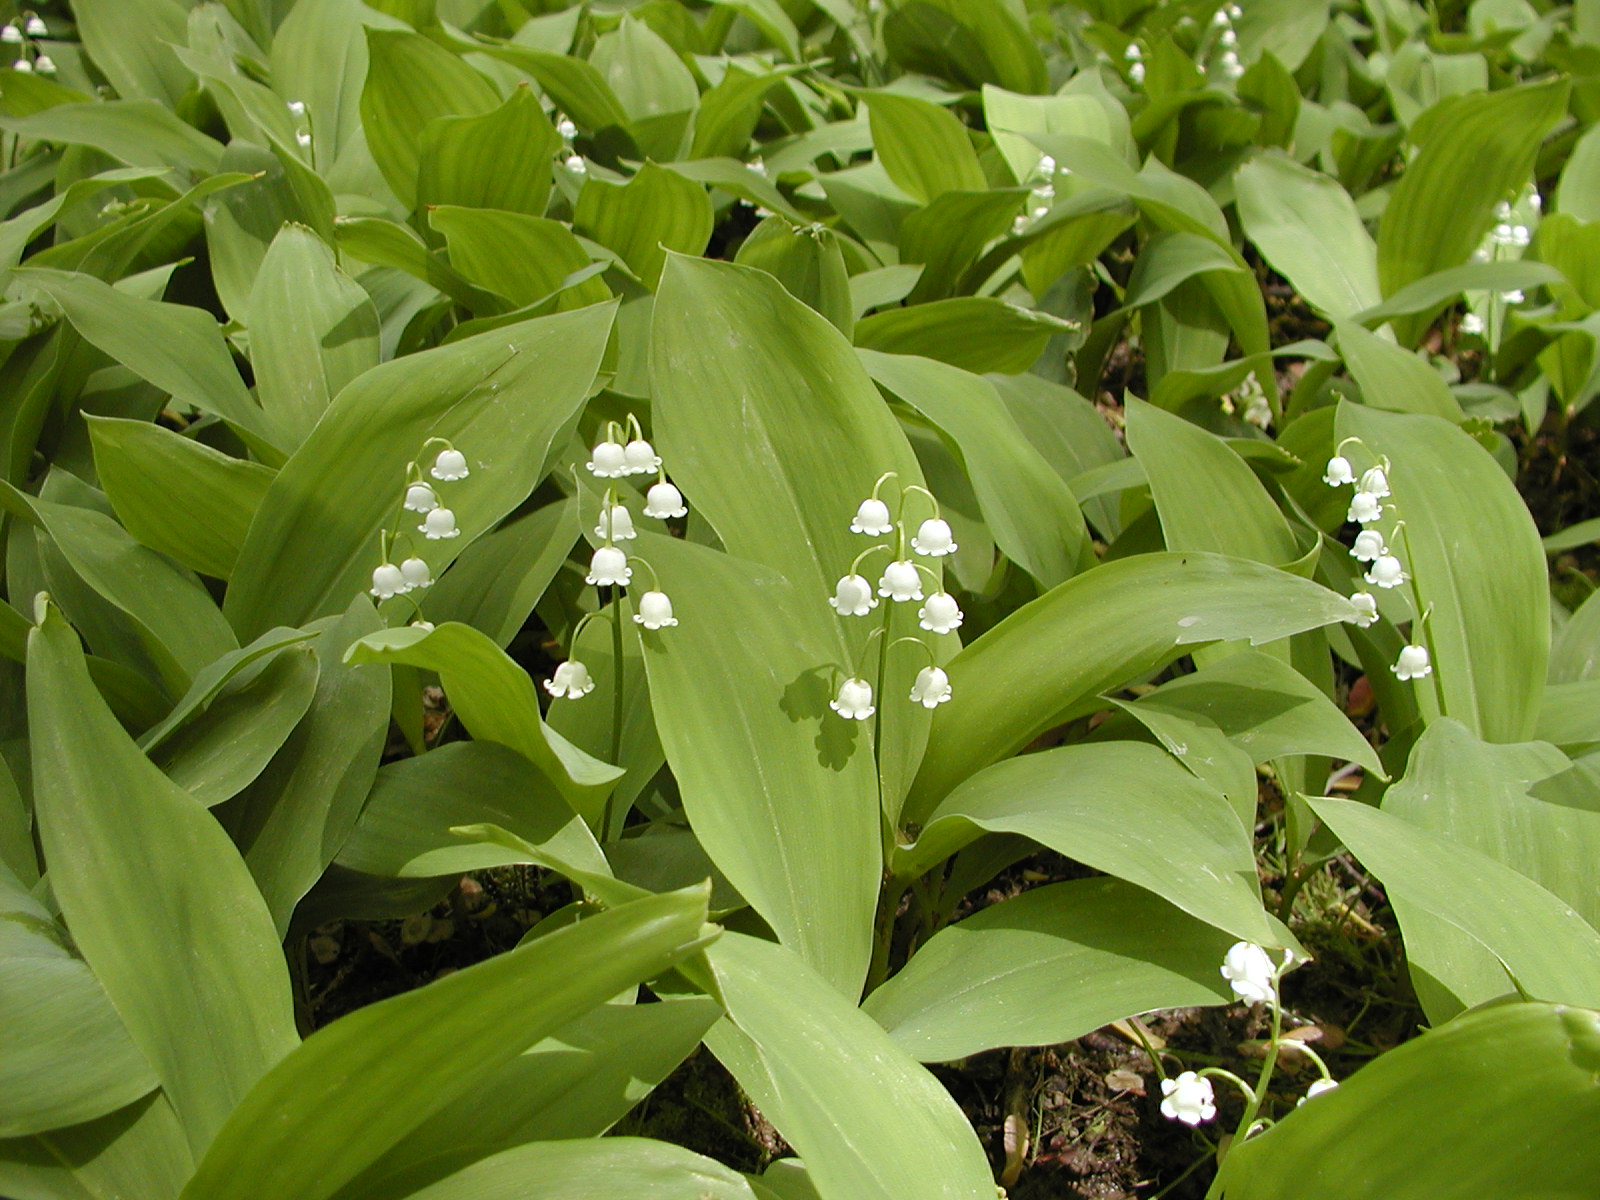 CONVALLARIA majalis - Lily-of-the-Valley